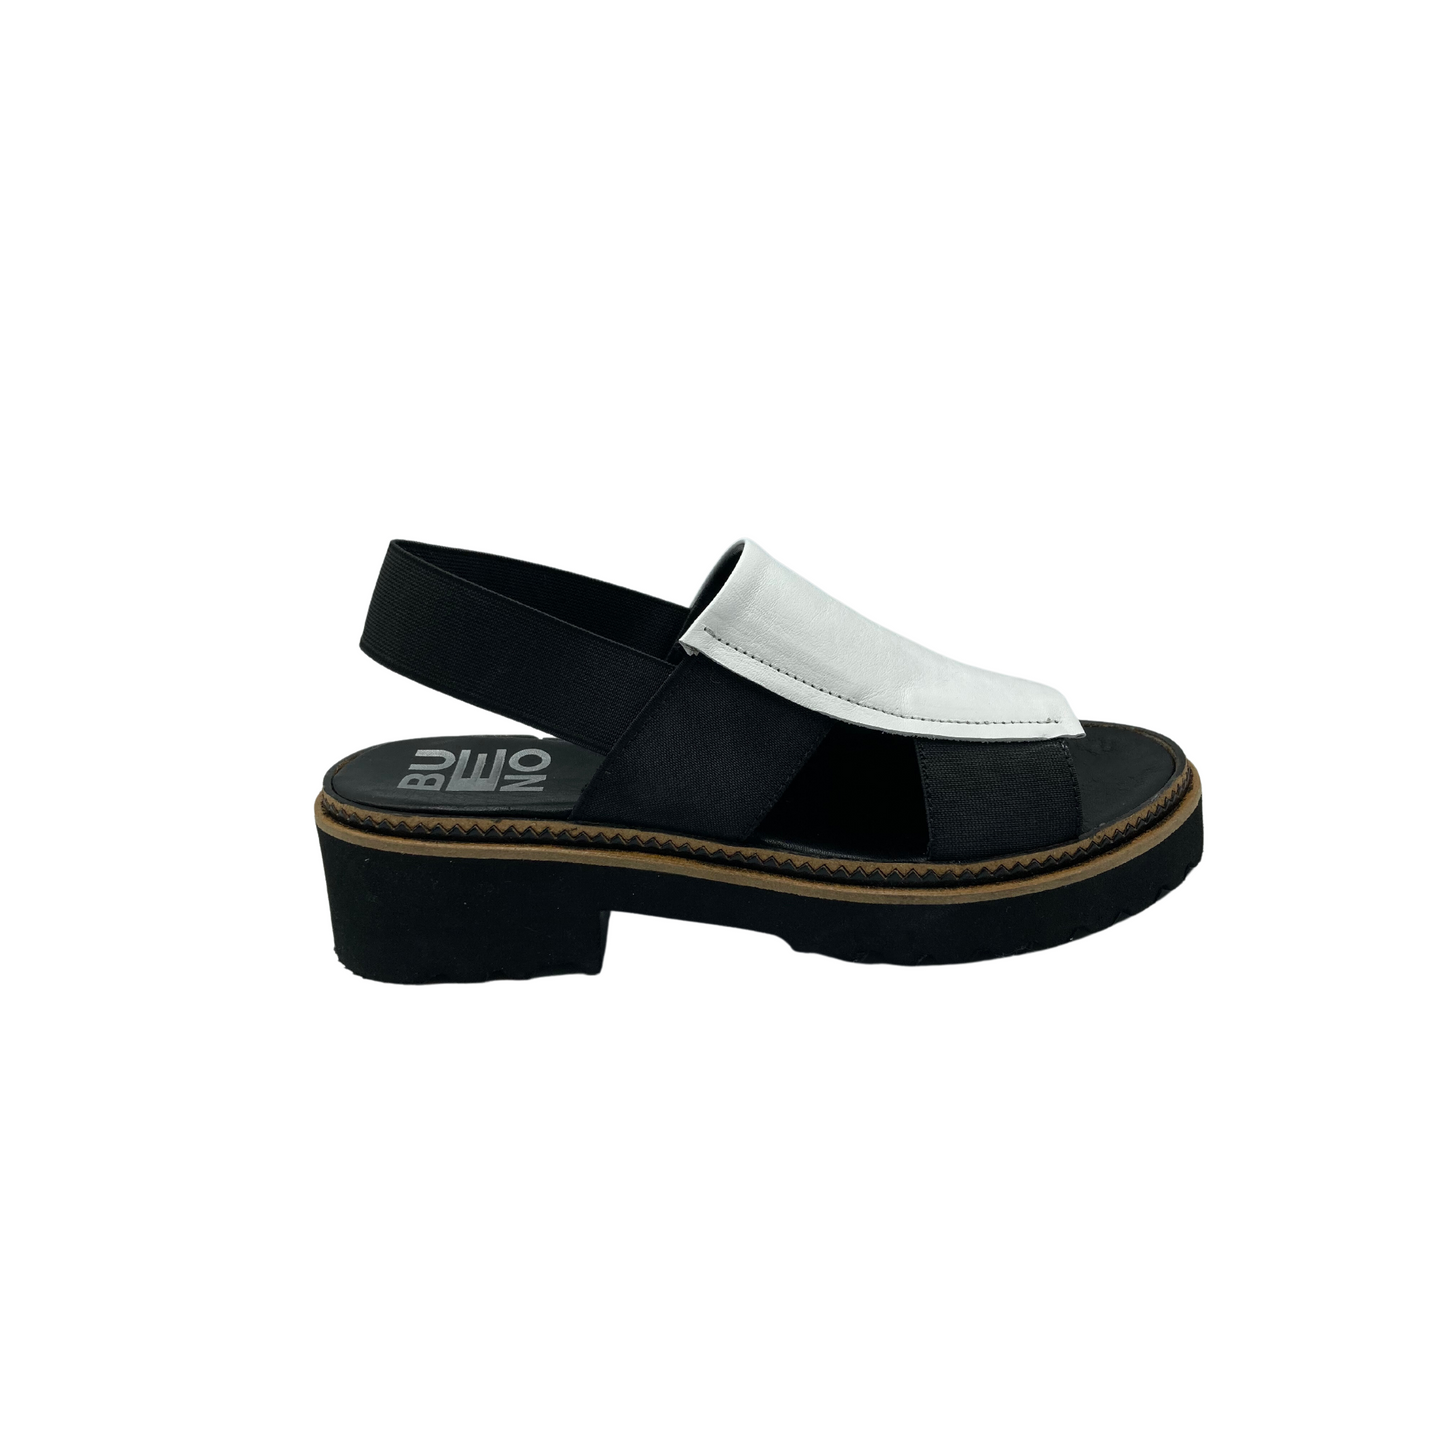 Outside view of Bueno Amy in two-tone black and white.  Slip on style with elastic back strap